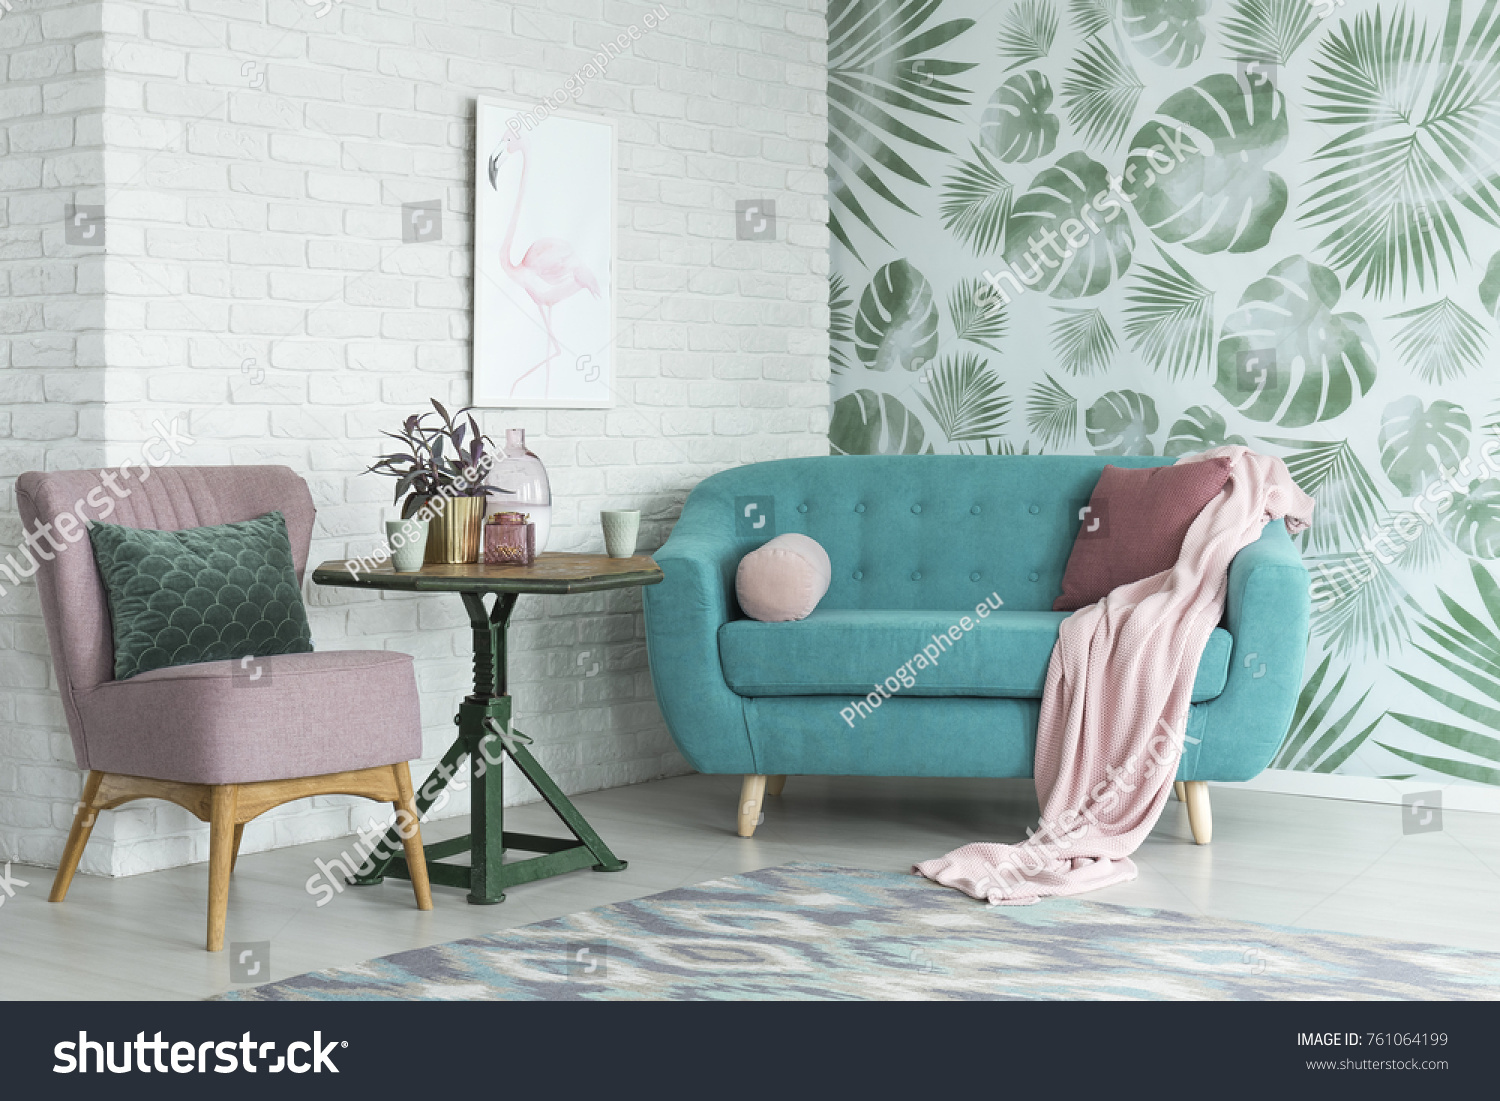 Green table with a plant between pink chair and blue sofa in floral living room with wallpaper and poster #761064199